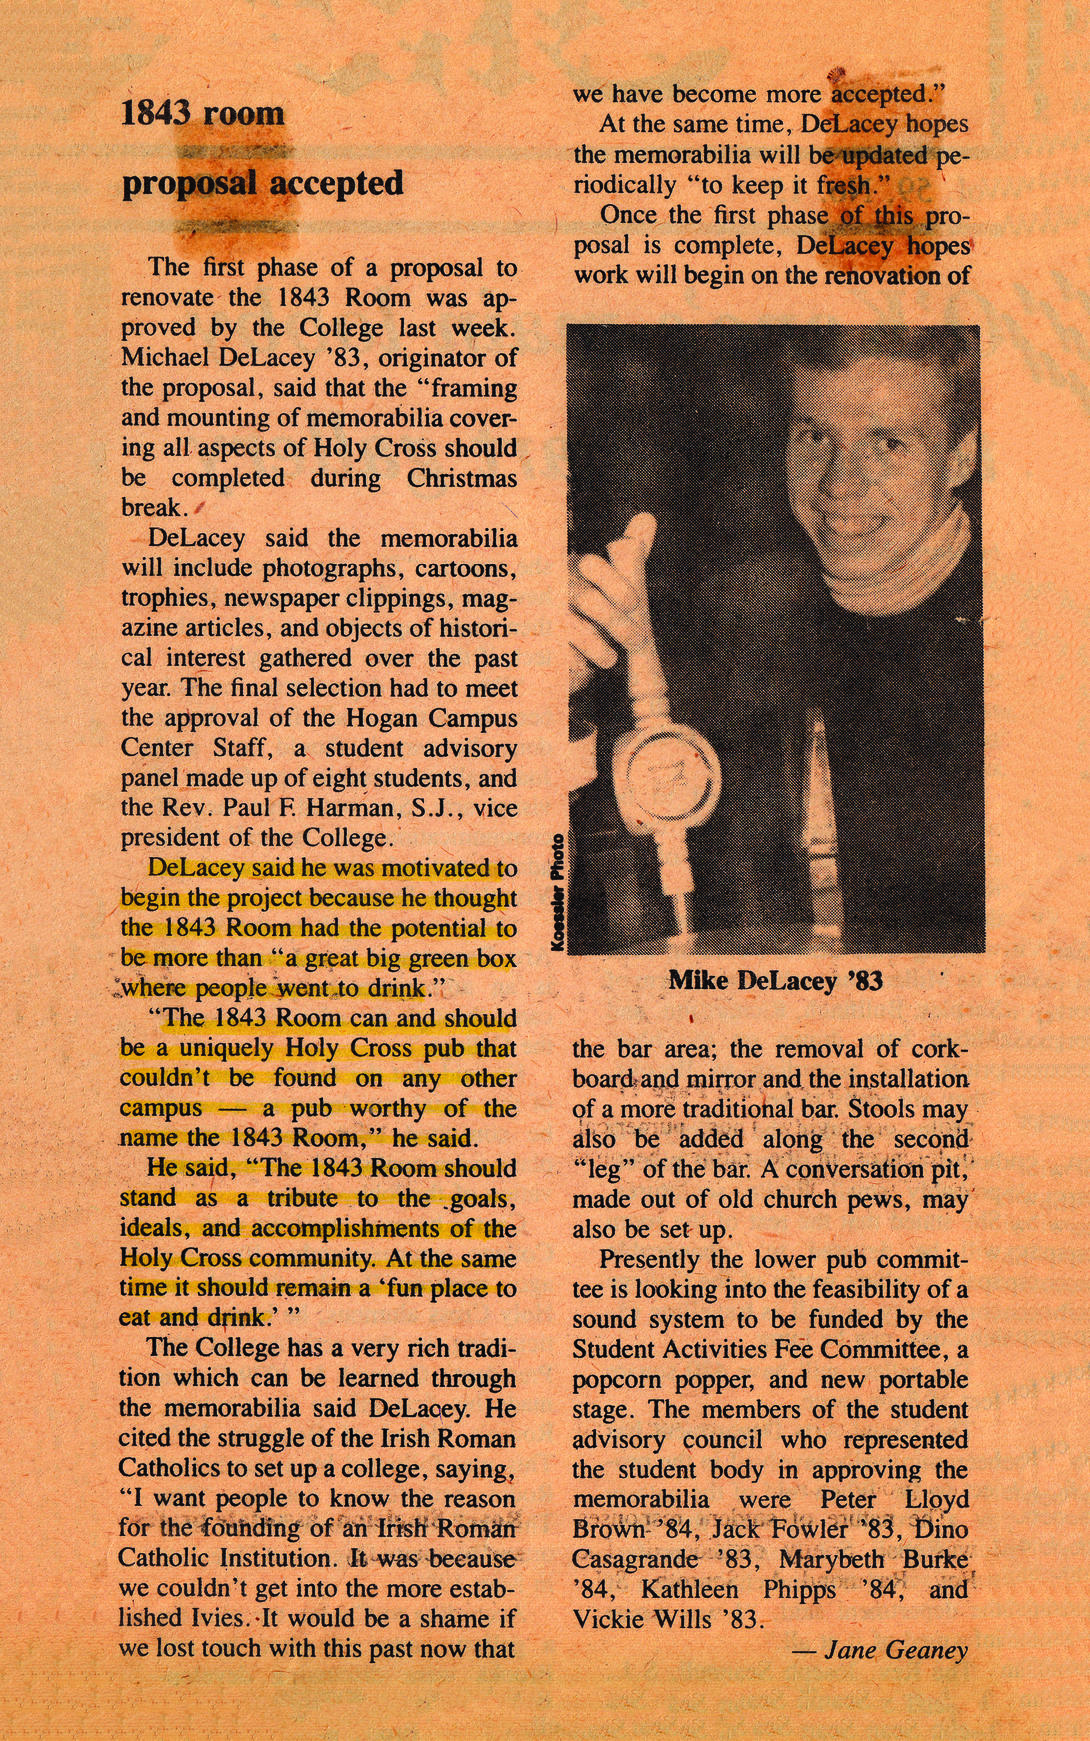 Newspaper clipping featuring a picture of a man holding a beer tap